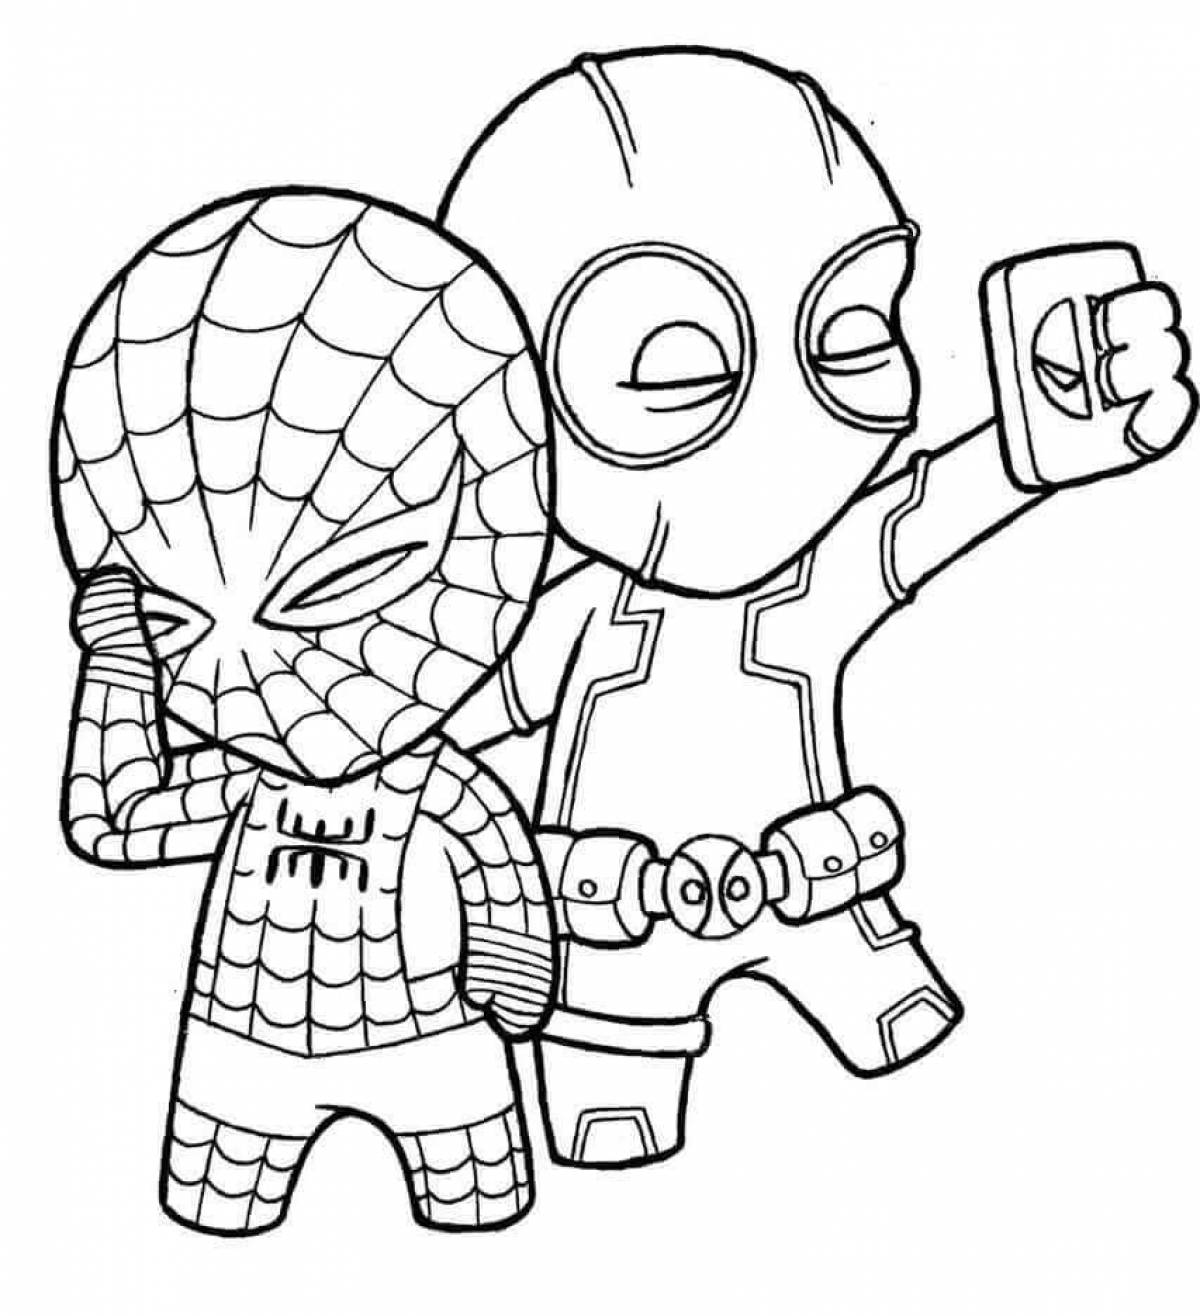 Deadpool and spider man for kids #3